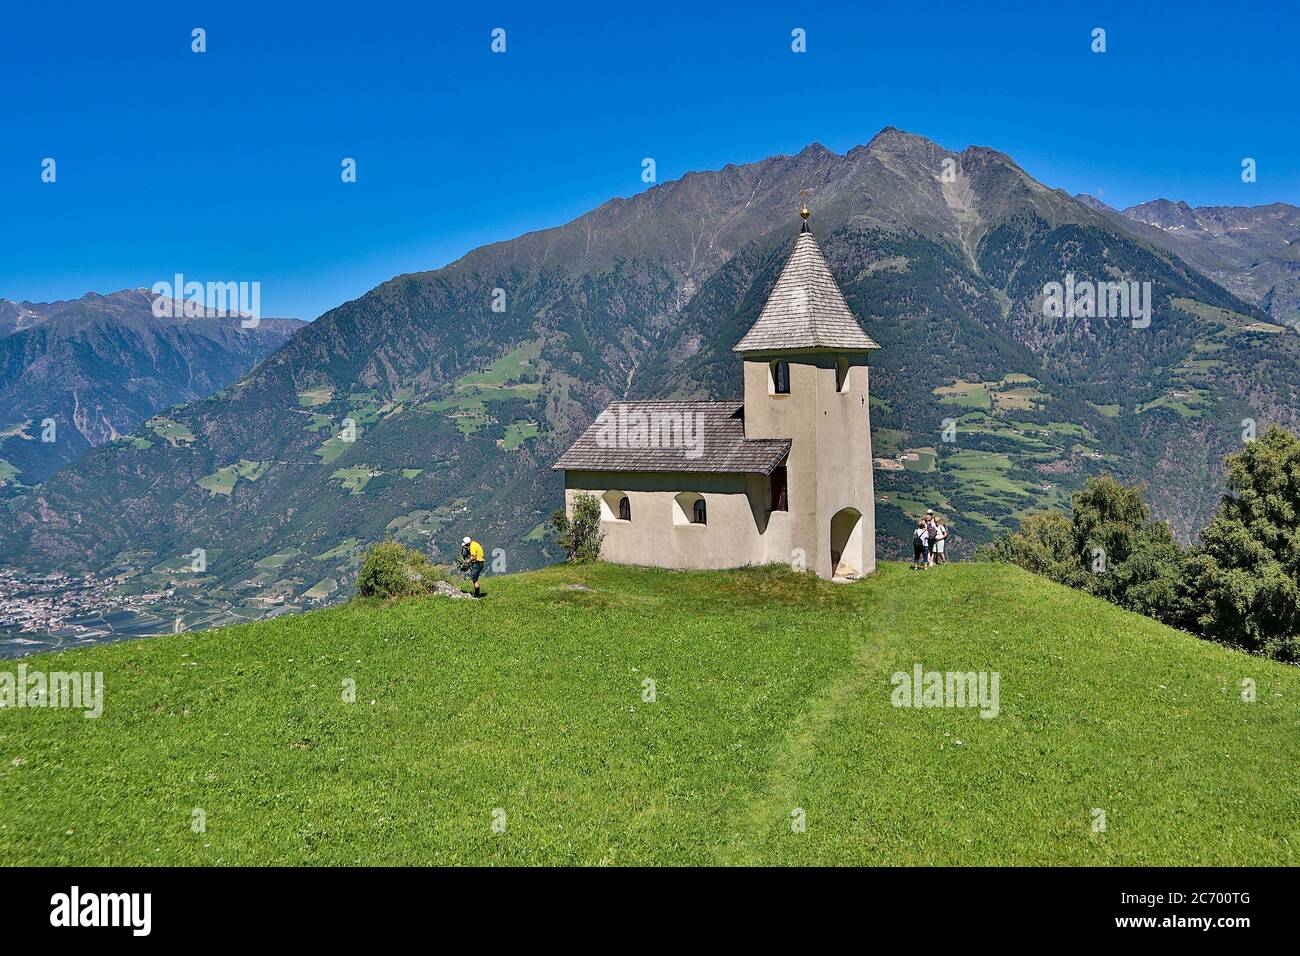 South Tyrol, Italy July 2020: Impressions of South Tyrol July 2020 Aschbach, Algund municipality, St. Maria in the snow with the peak in the background | usage worldwide Stock Photo